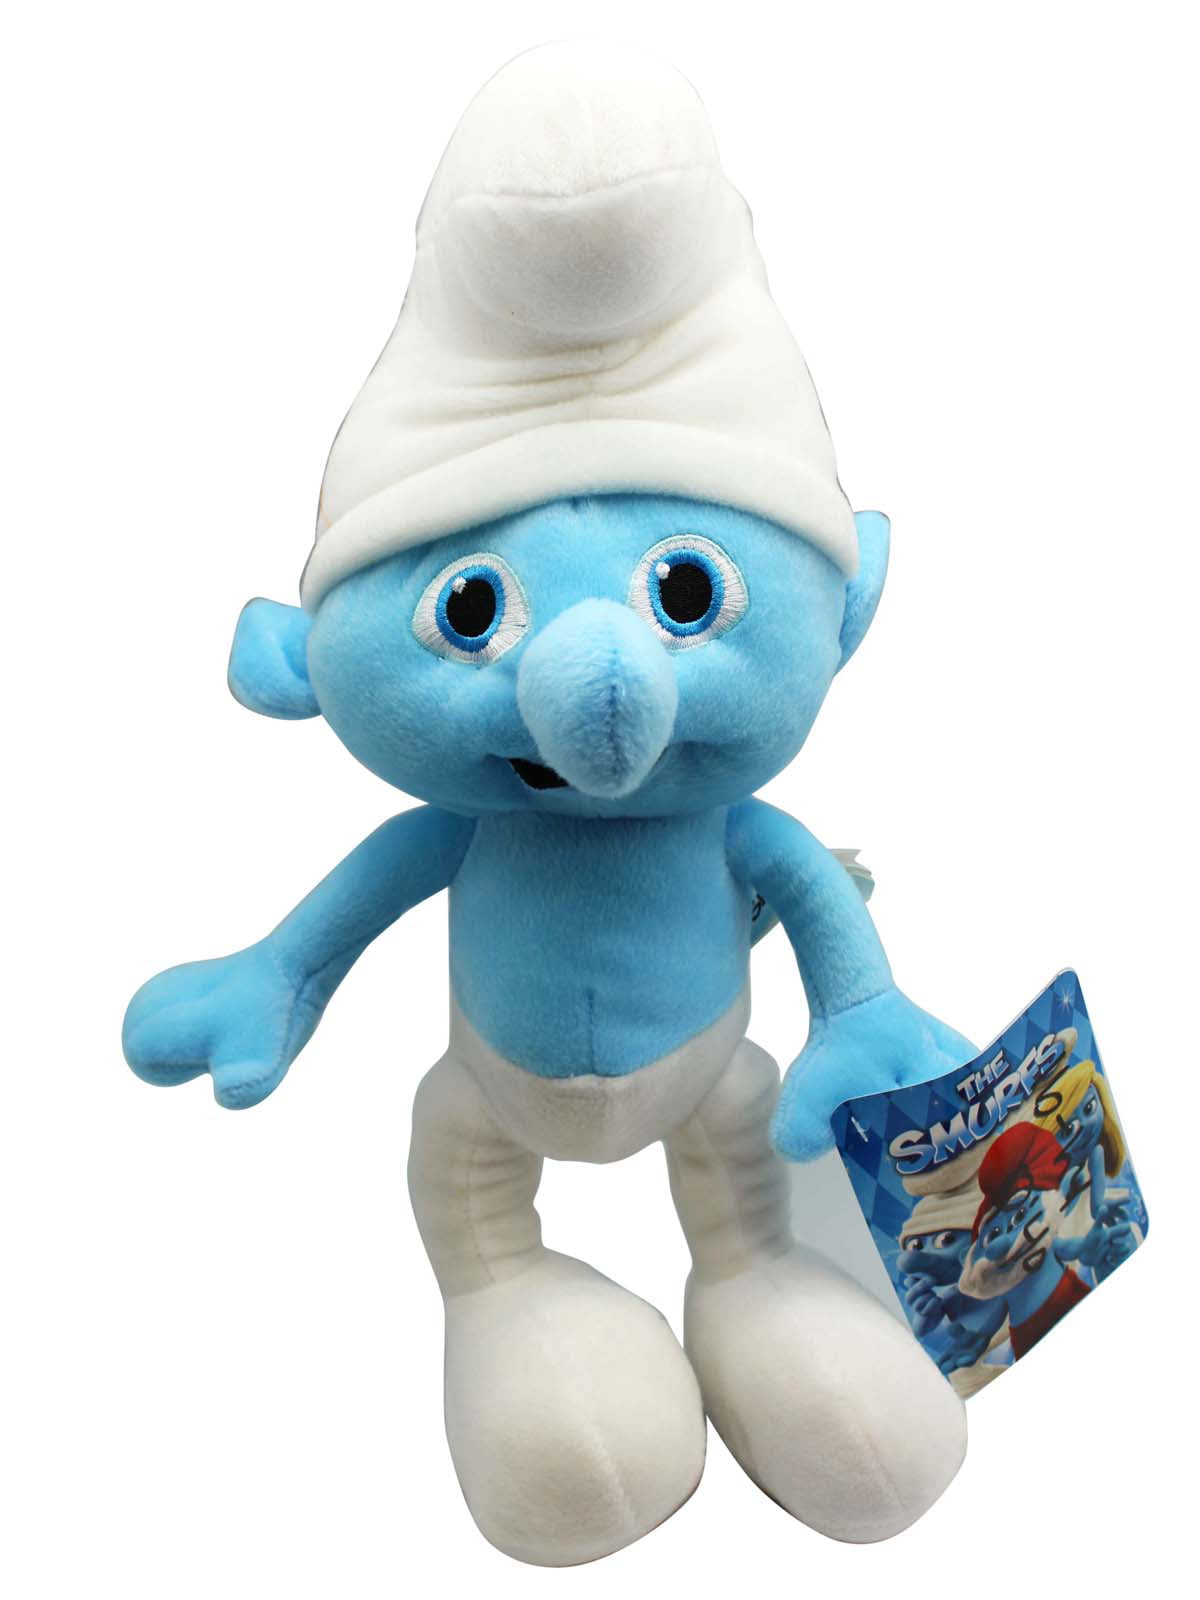 The Smurfs Clumsy Smurfette 24PCS Cartoon Action Figure Doll Gift Kid Toy Random 